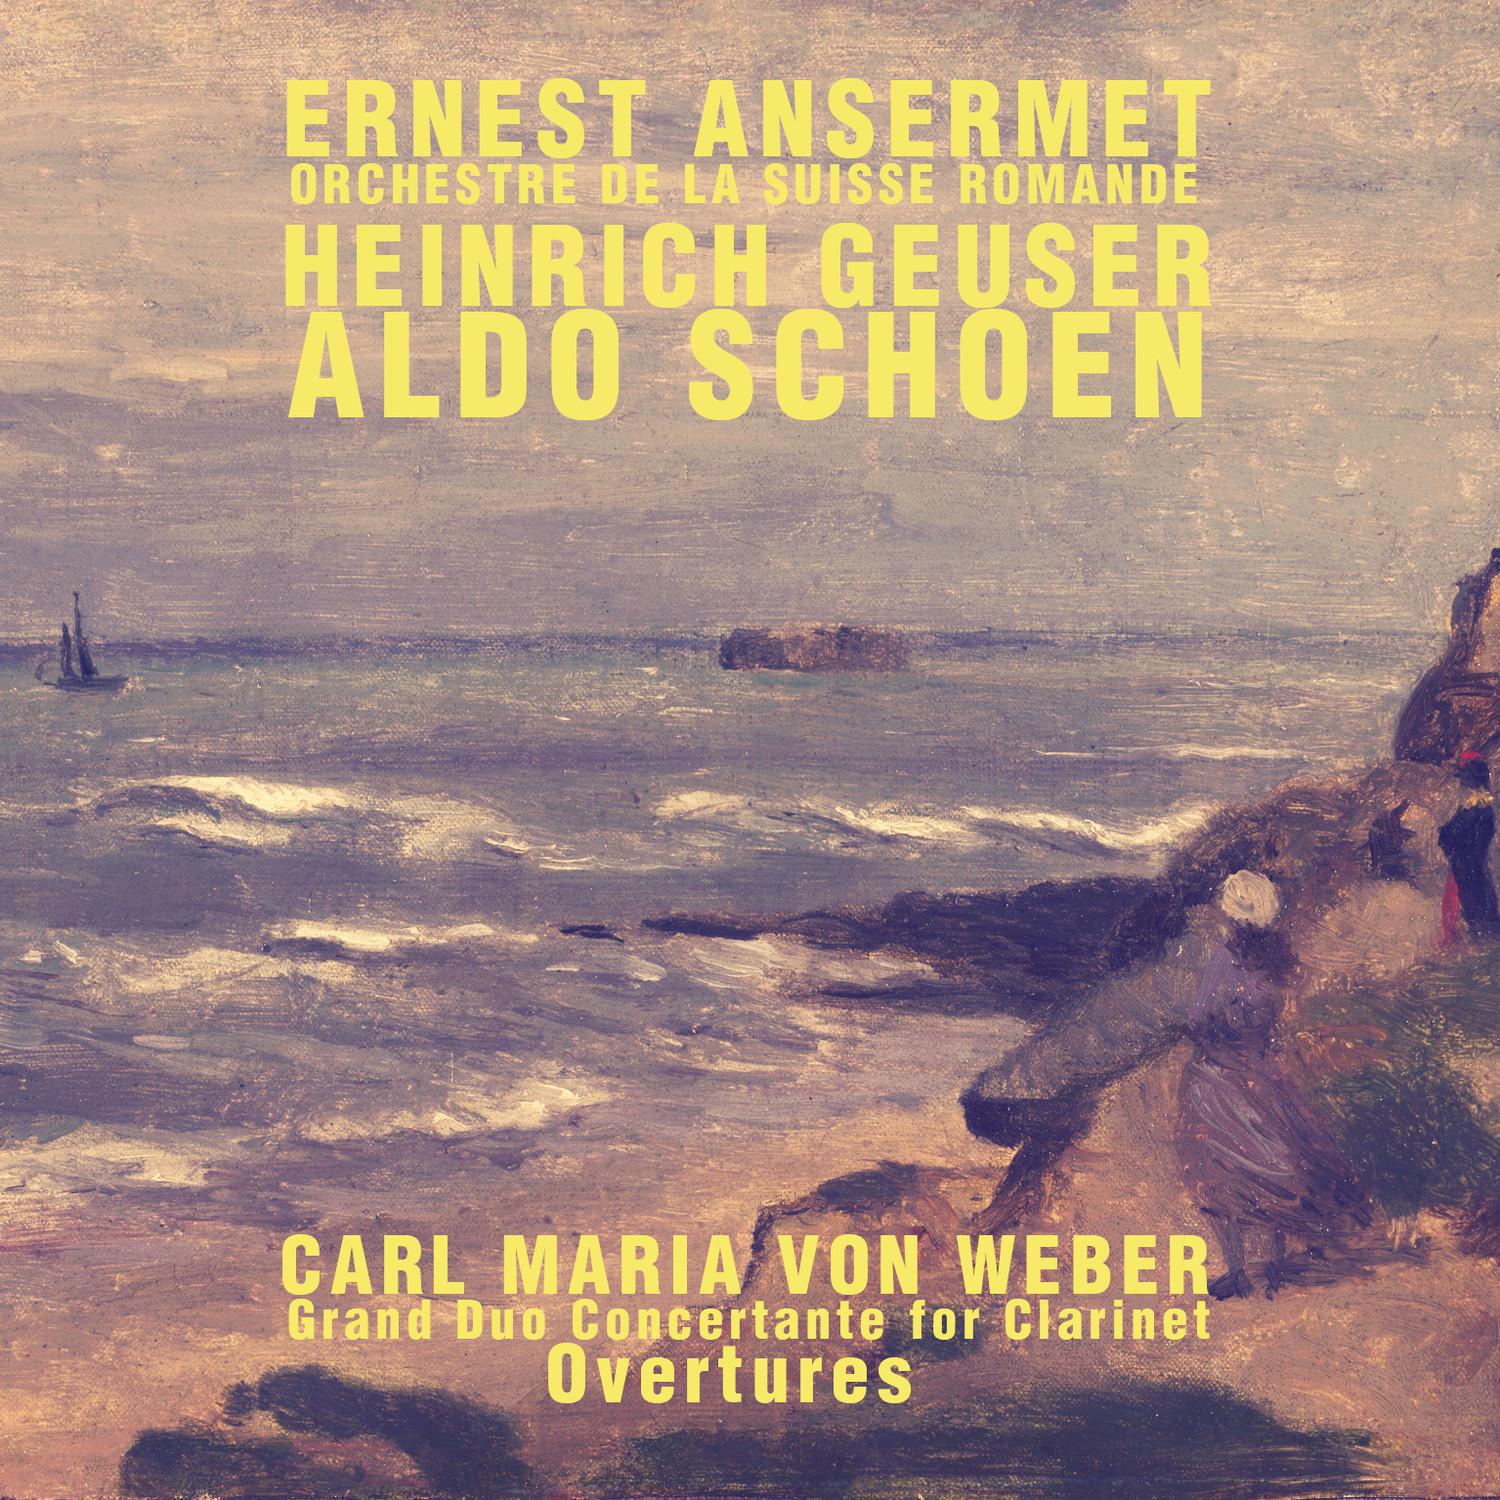 Carl Maria von Weber: Grand Duo Concertante for Clarinet & Overtures